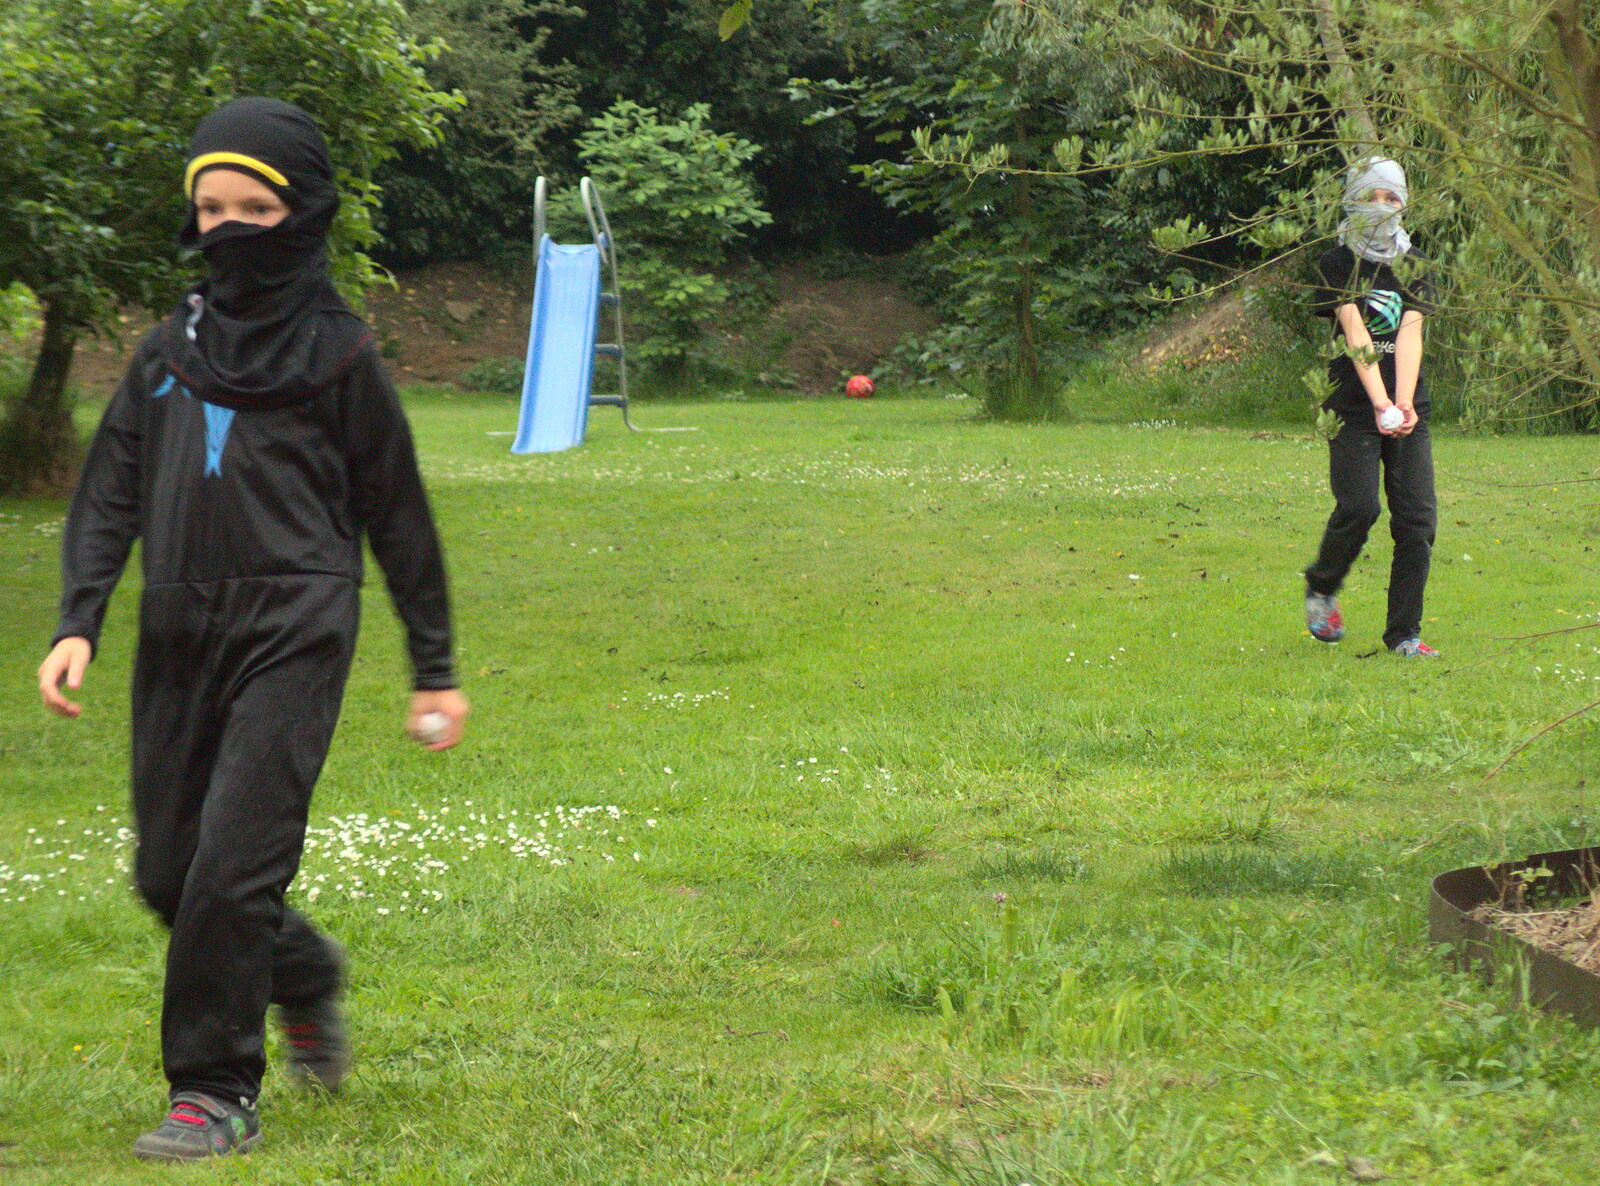 Harry's a Ninja too from The Not-Opening of the Palgrave Playground, Palgrave, Suffolk - 3rd June 2018